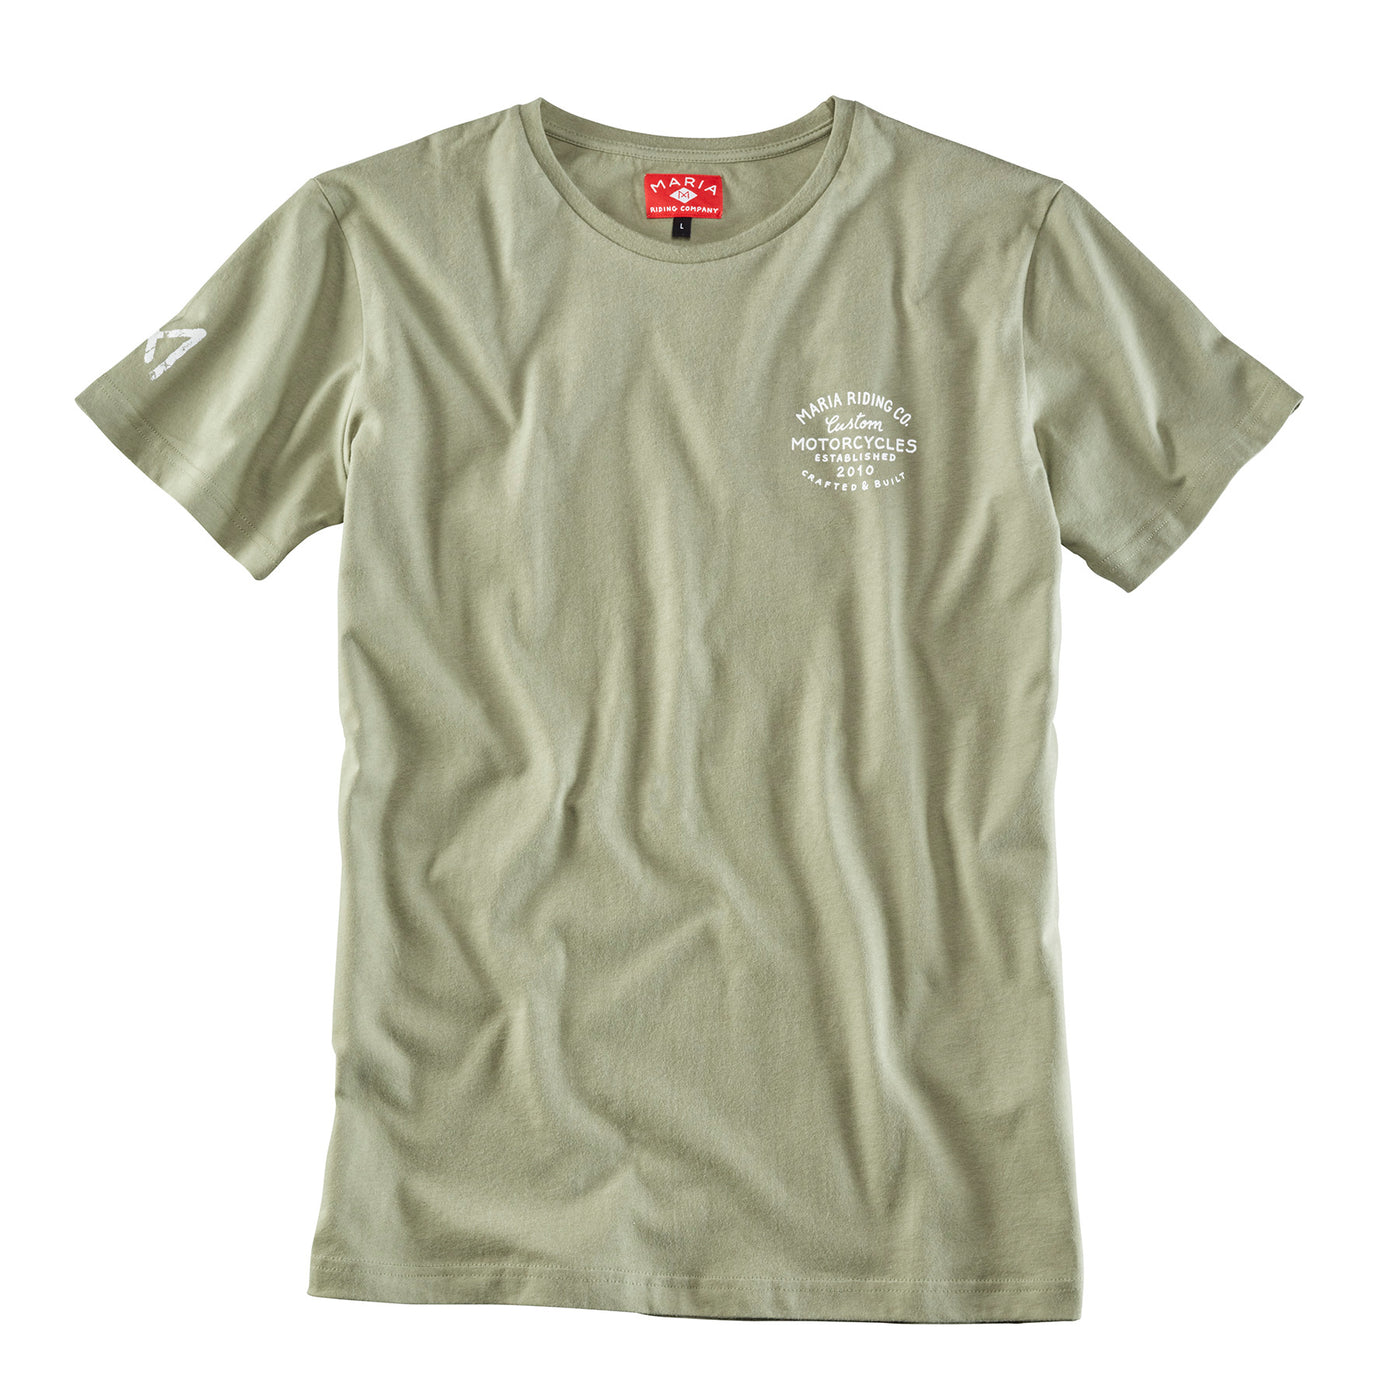 Maria Riding Company T-Shirt Handcrafted Olive